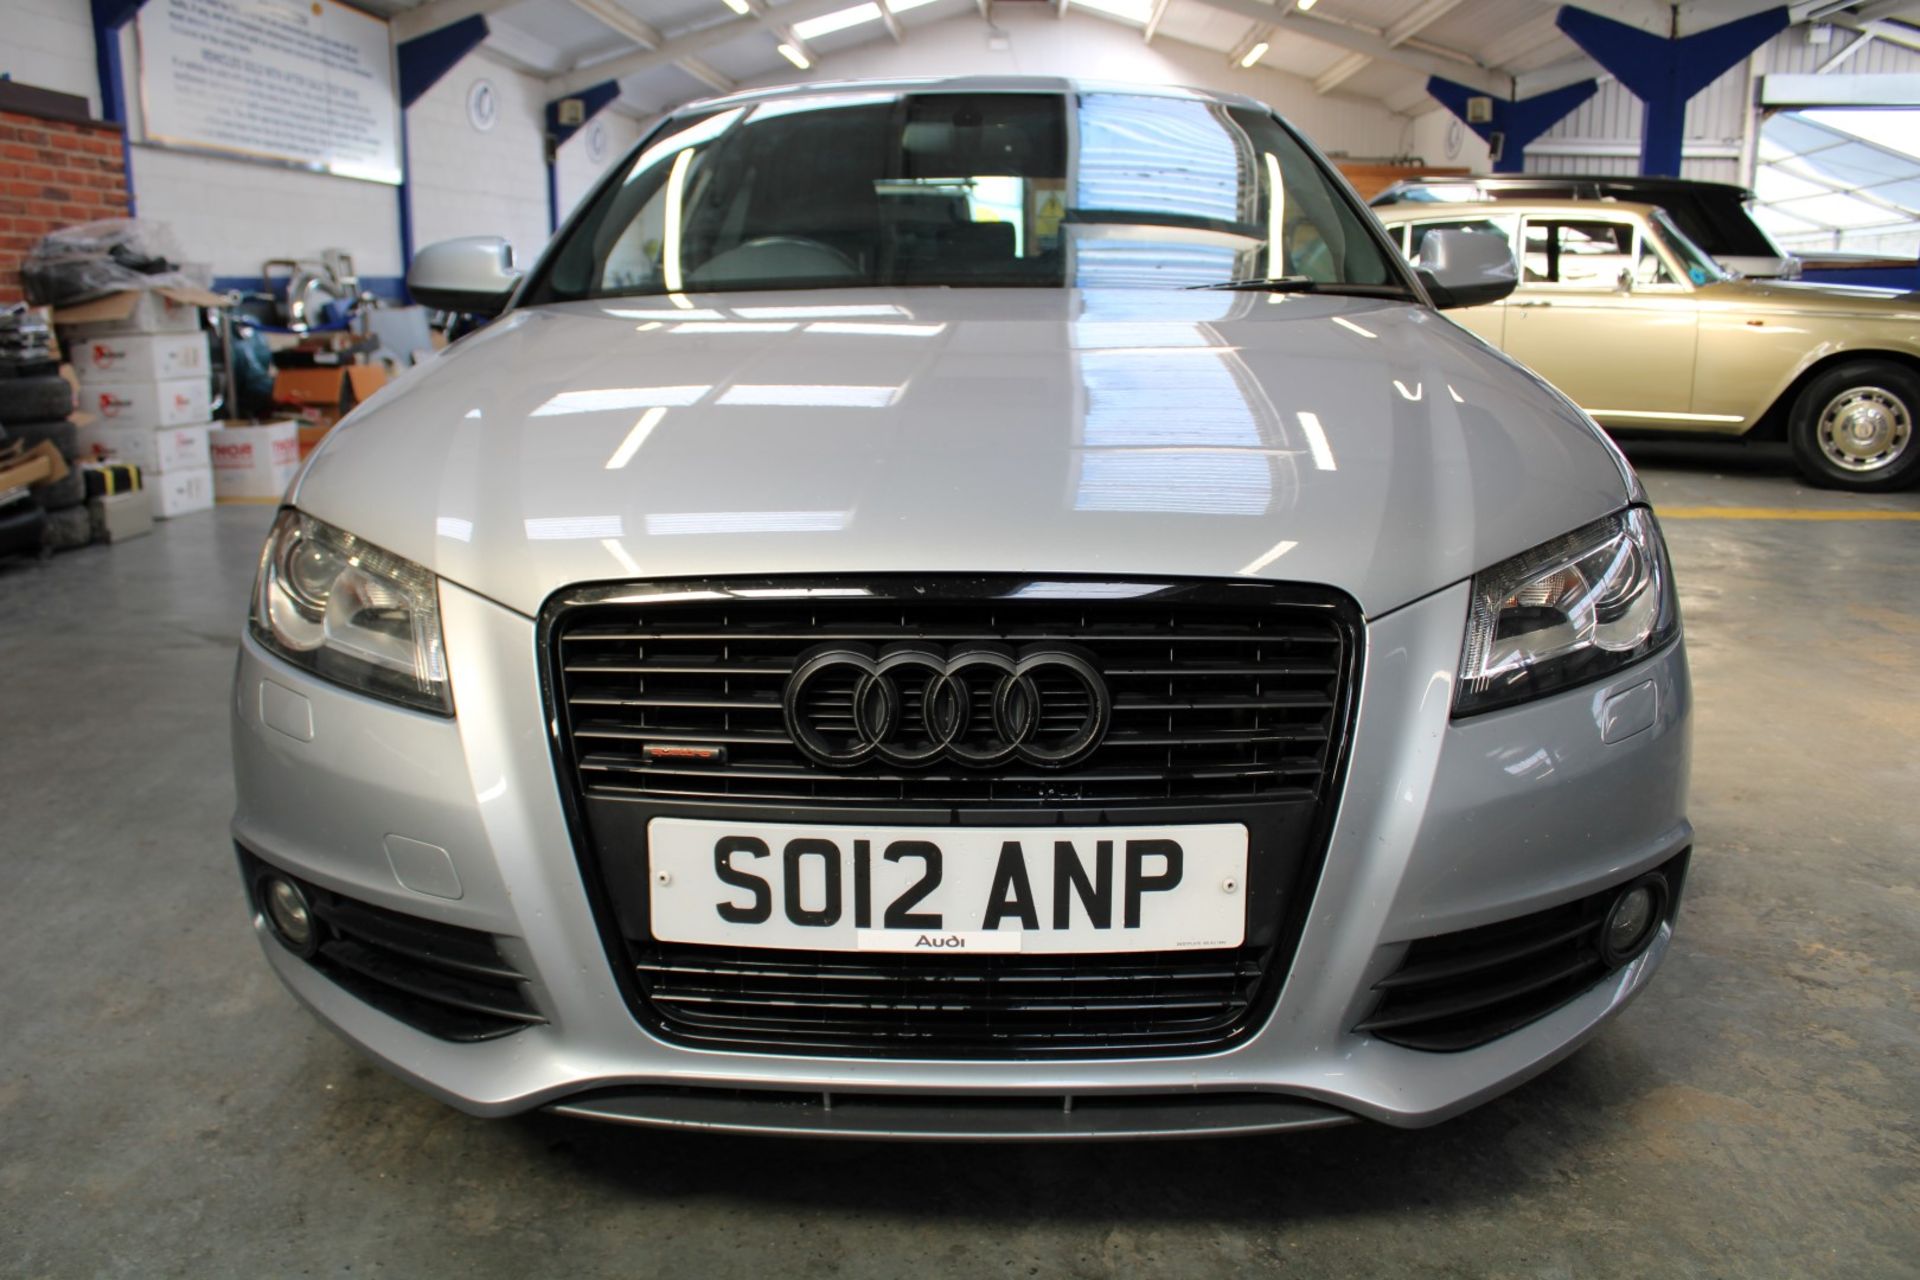 12 12 Audi A3 S Line Sp Edn TDI - Image 28 of 28